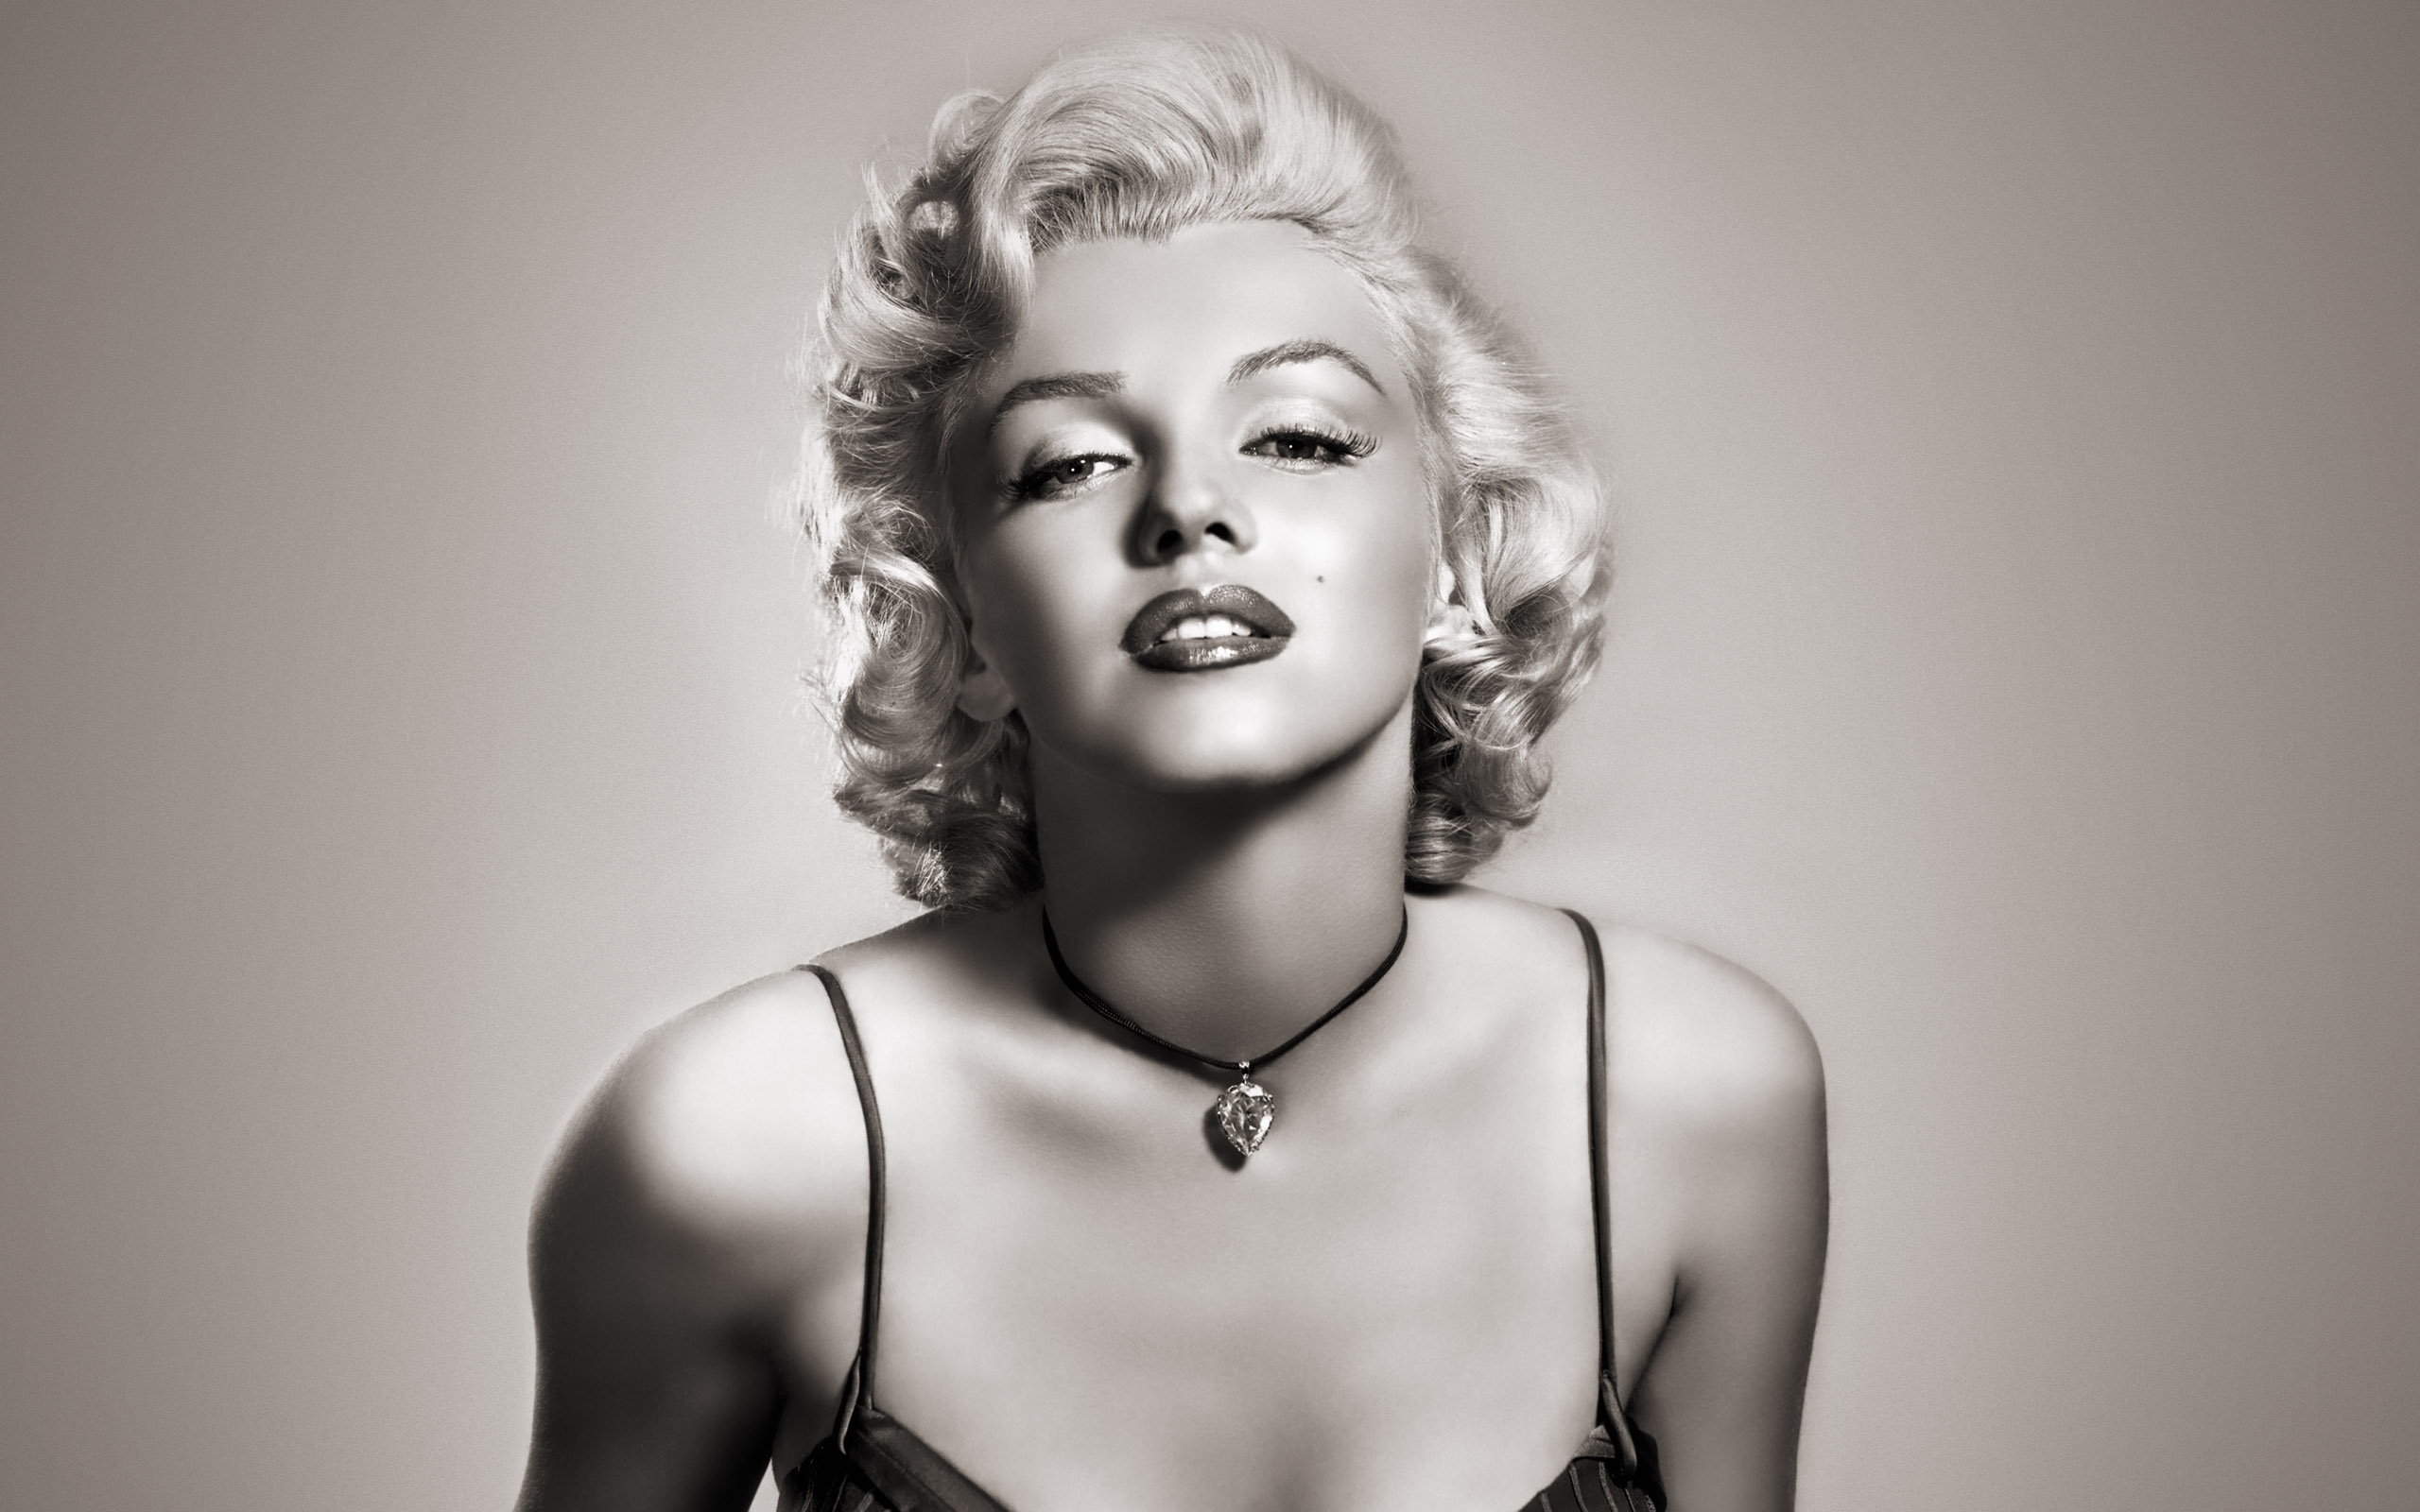 23260 download wallpaper people, girls, actors, gray, marilyn monroe screensavers and pictures for free